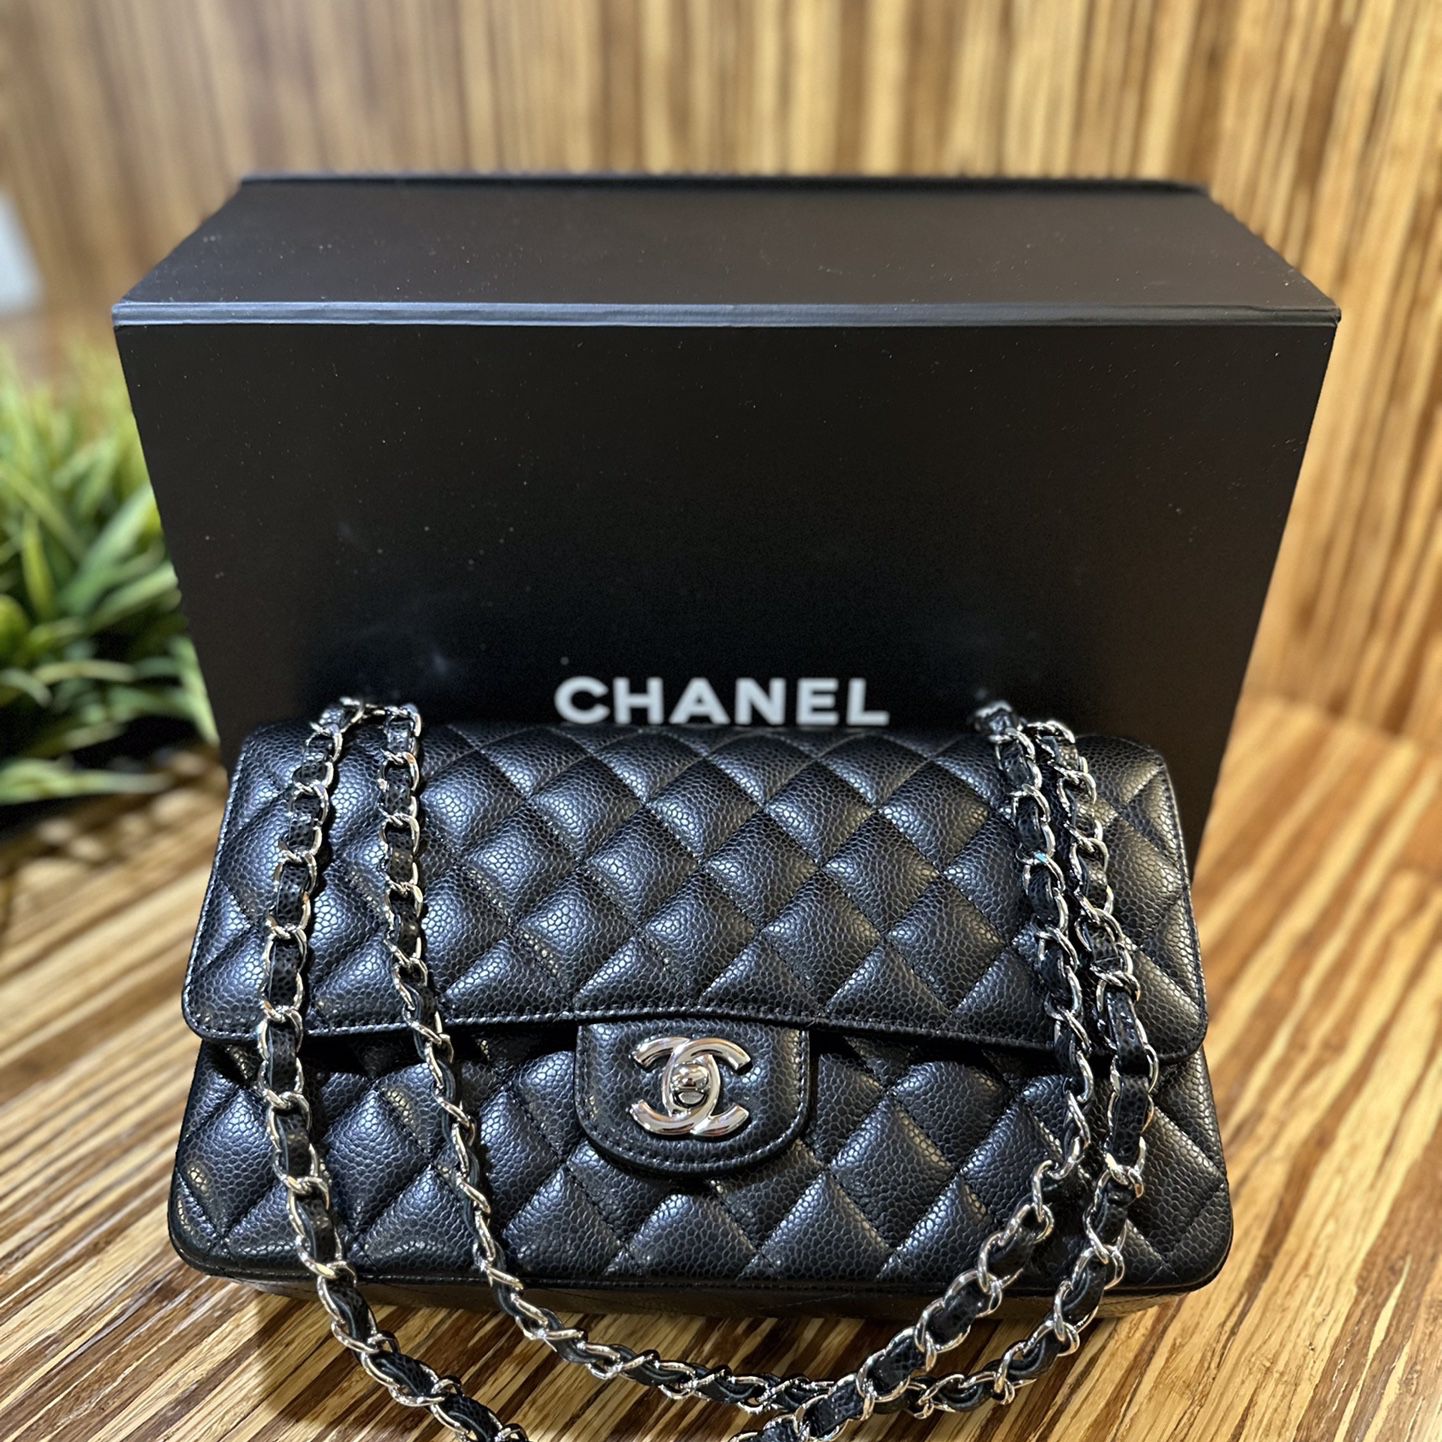 Vintage Chanel purse for Sale in Midway City, CA - OfferUp